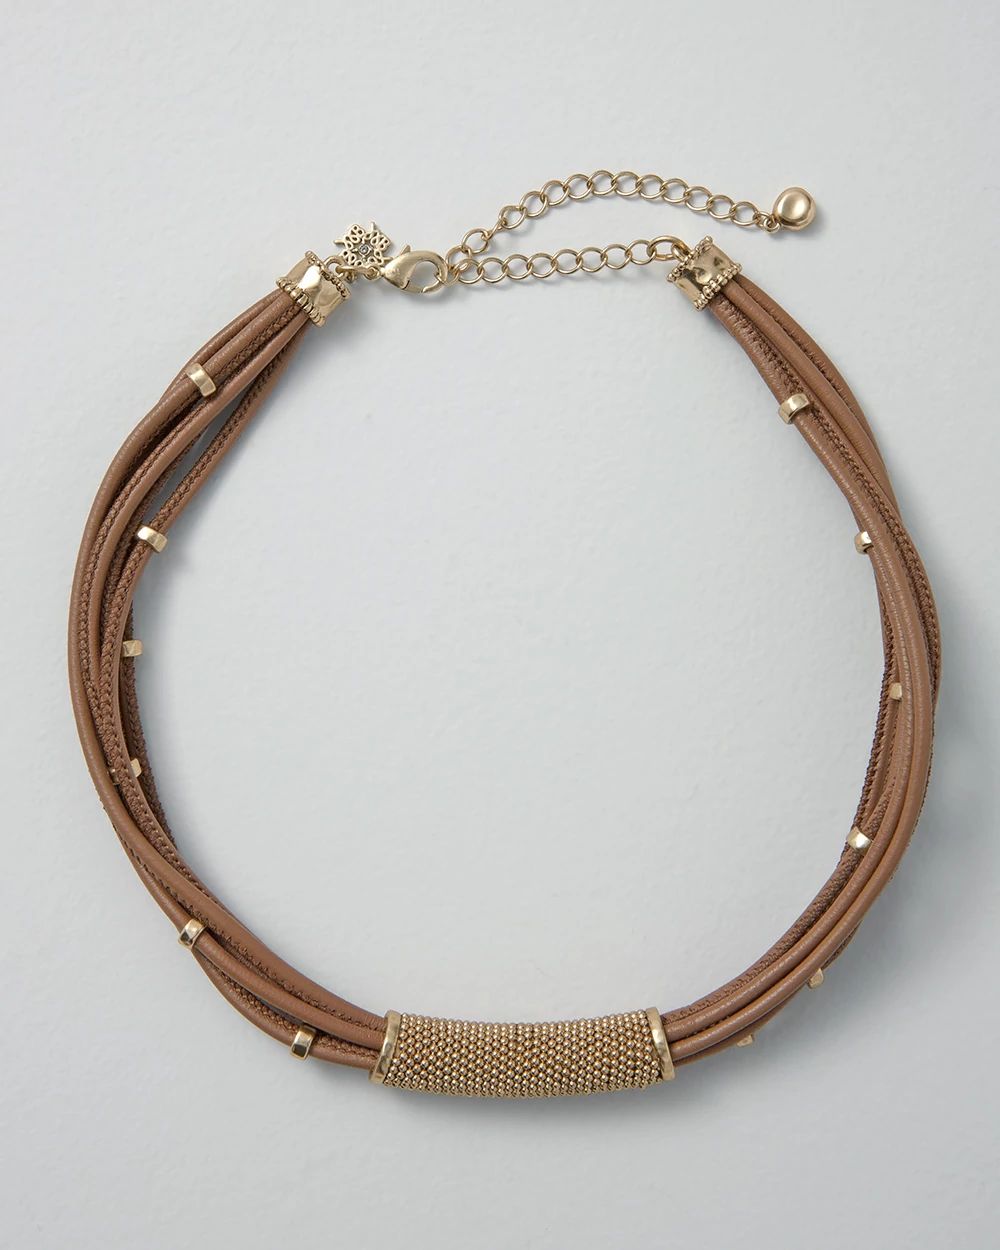 Goldtone Leather Collar Necklace click to view larger image.